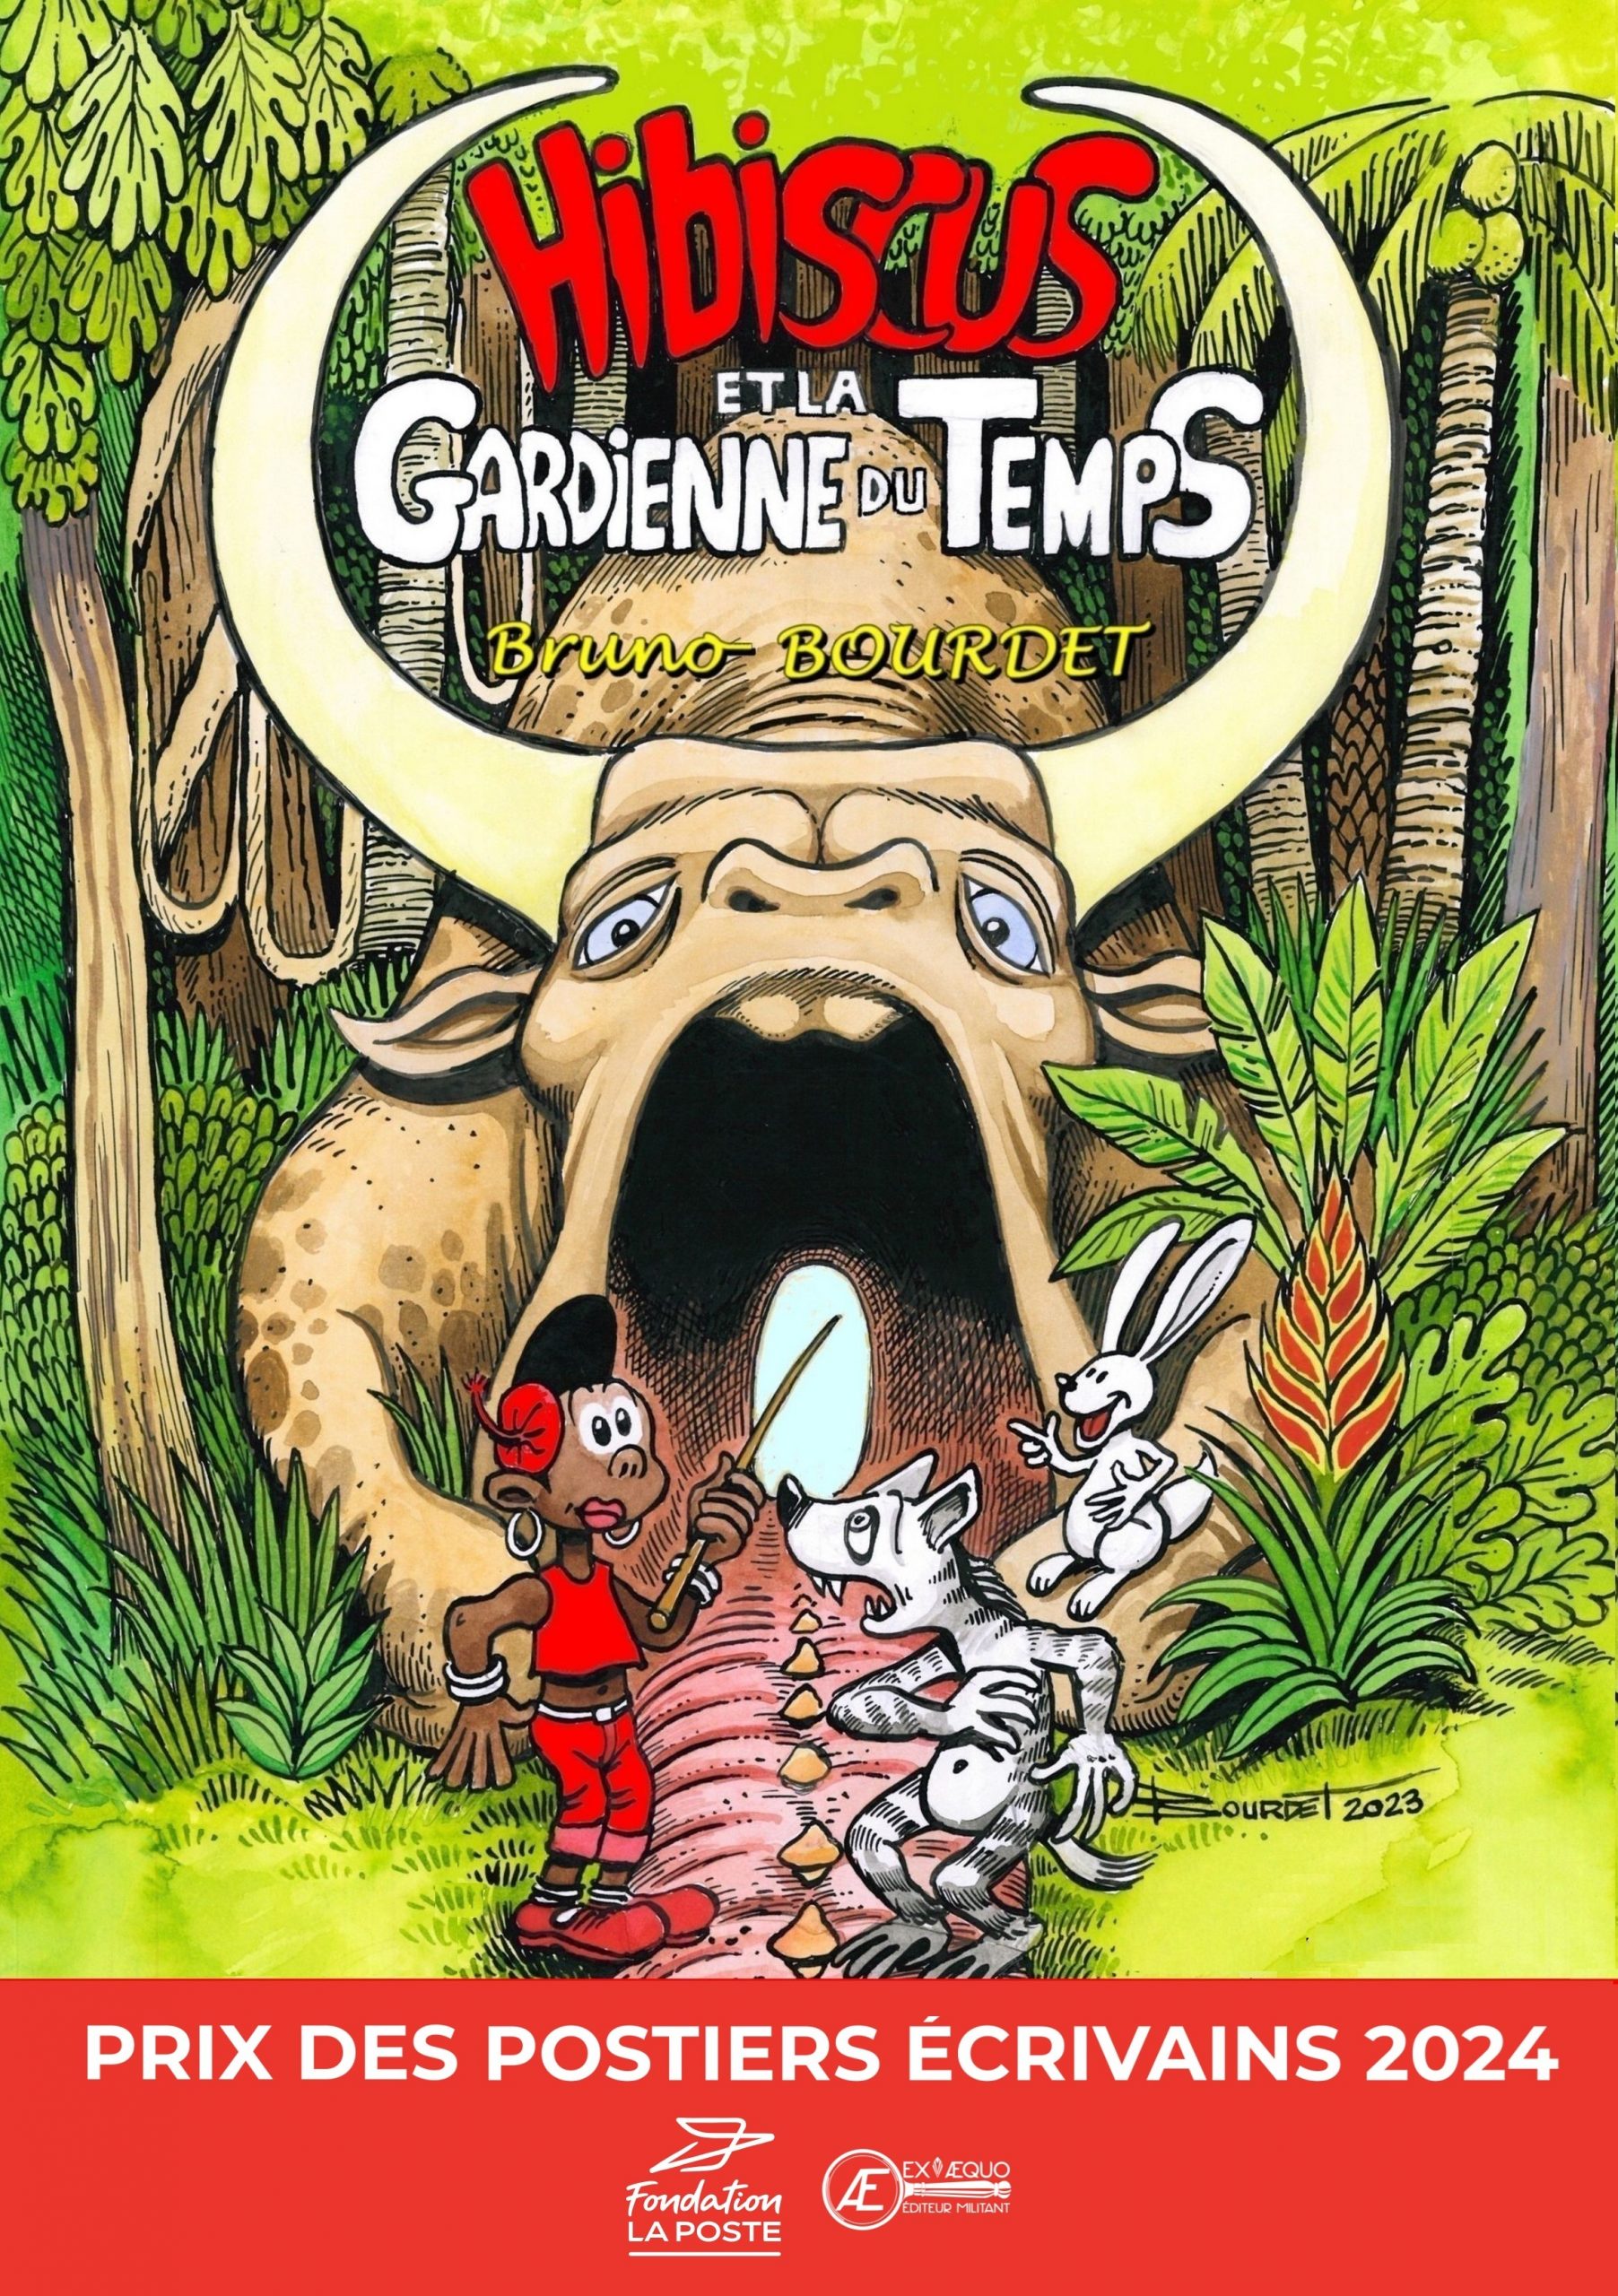 You are currently viewing Hibiscus et la gardienne du temps